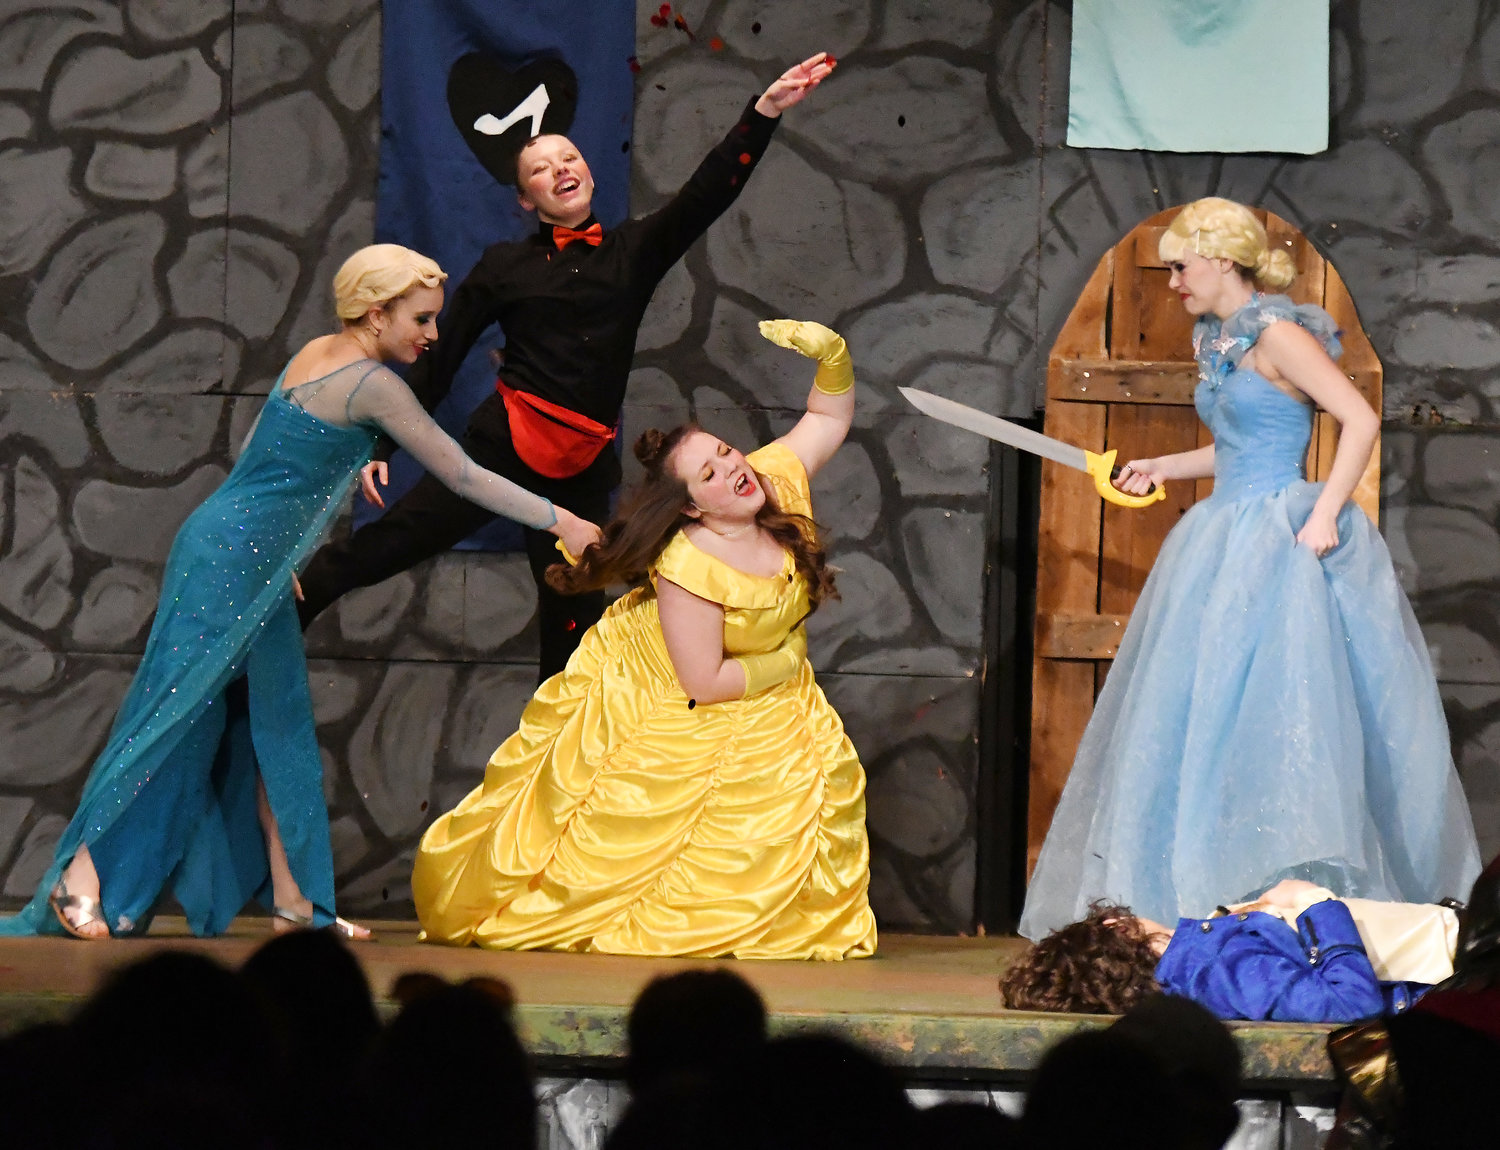 Shelby Malone, as the Snow Queen and Josie Wilka as Cinderella stab their sister Belle, played by Shelby Malone.